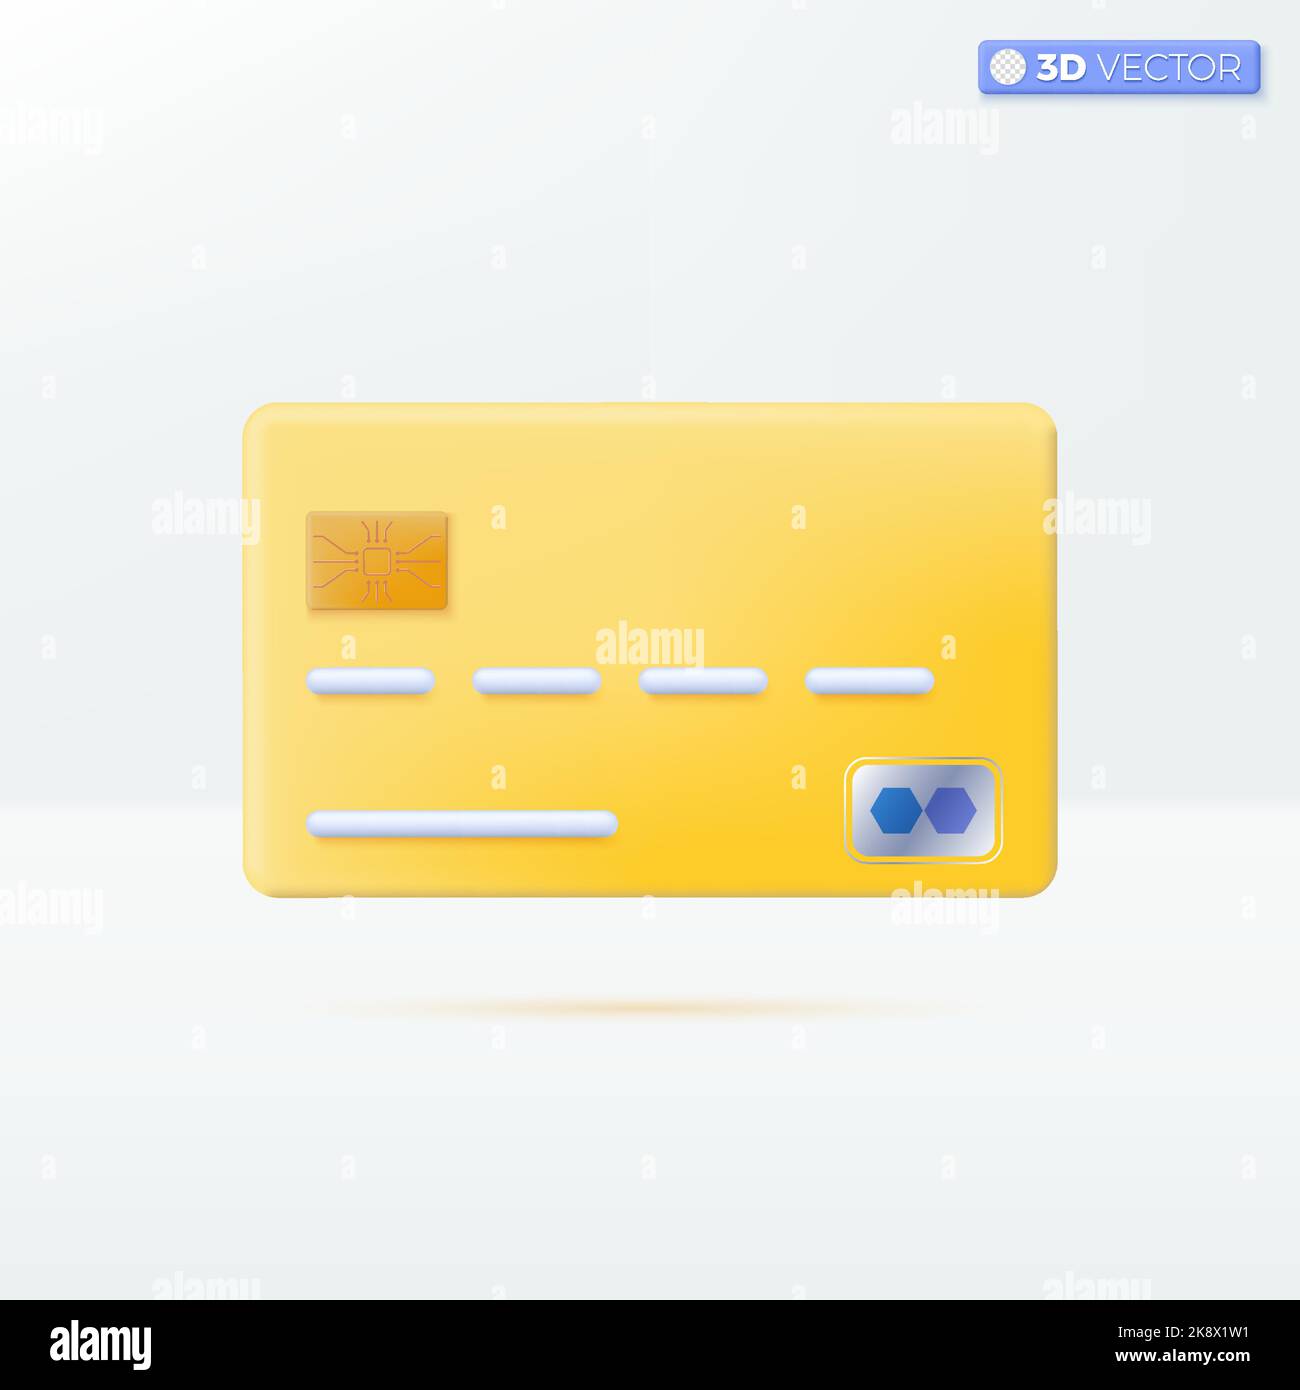 Gold Class credit card icon symbols. Payments, online banking, money transfers concept. 3D vector isolated illustration design. Cartoon pastel Minimal Stock Vector